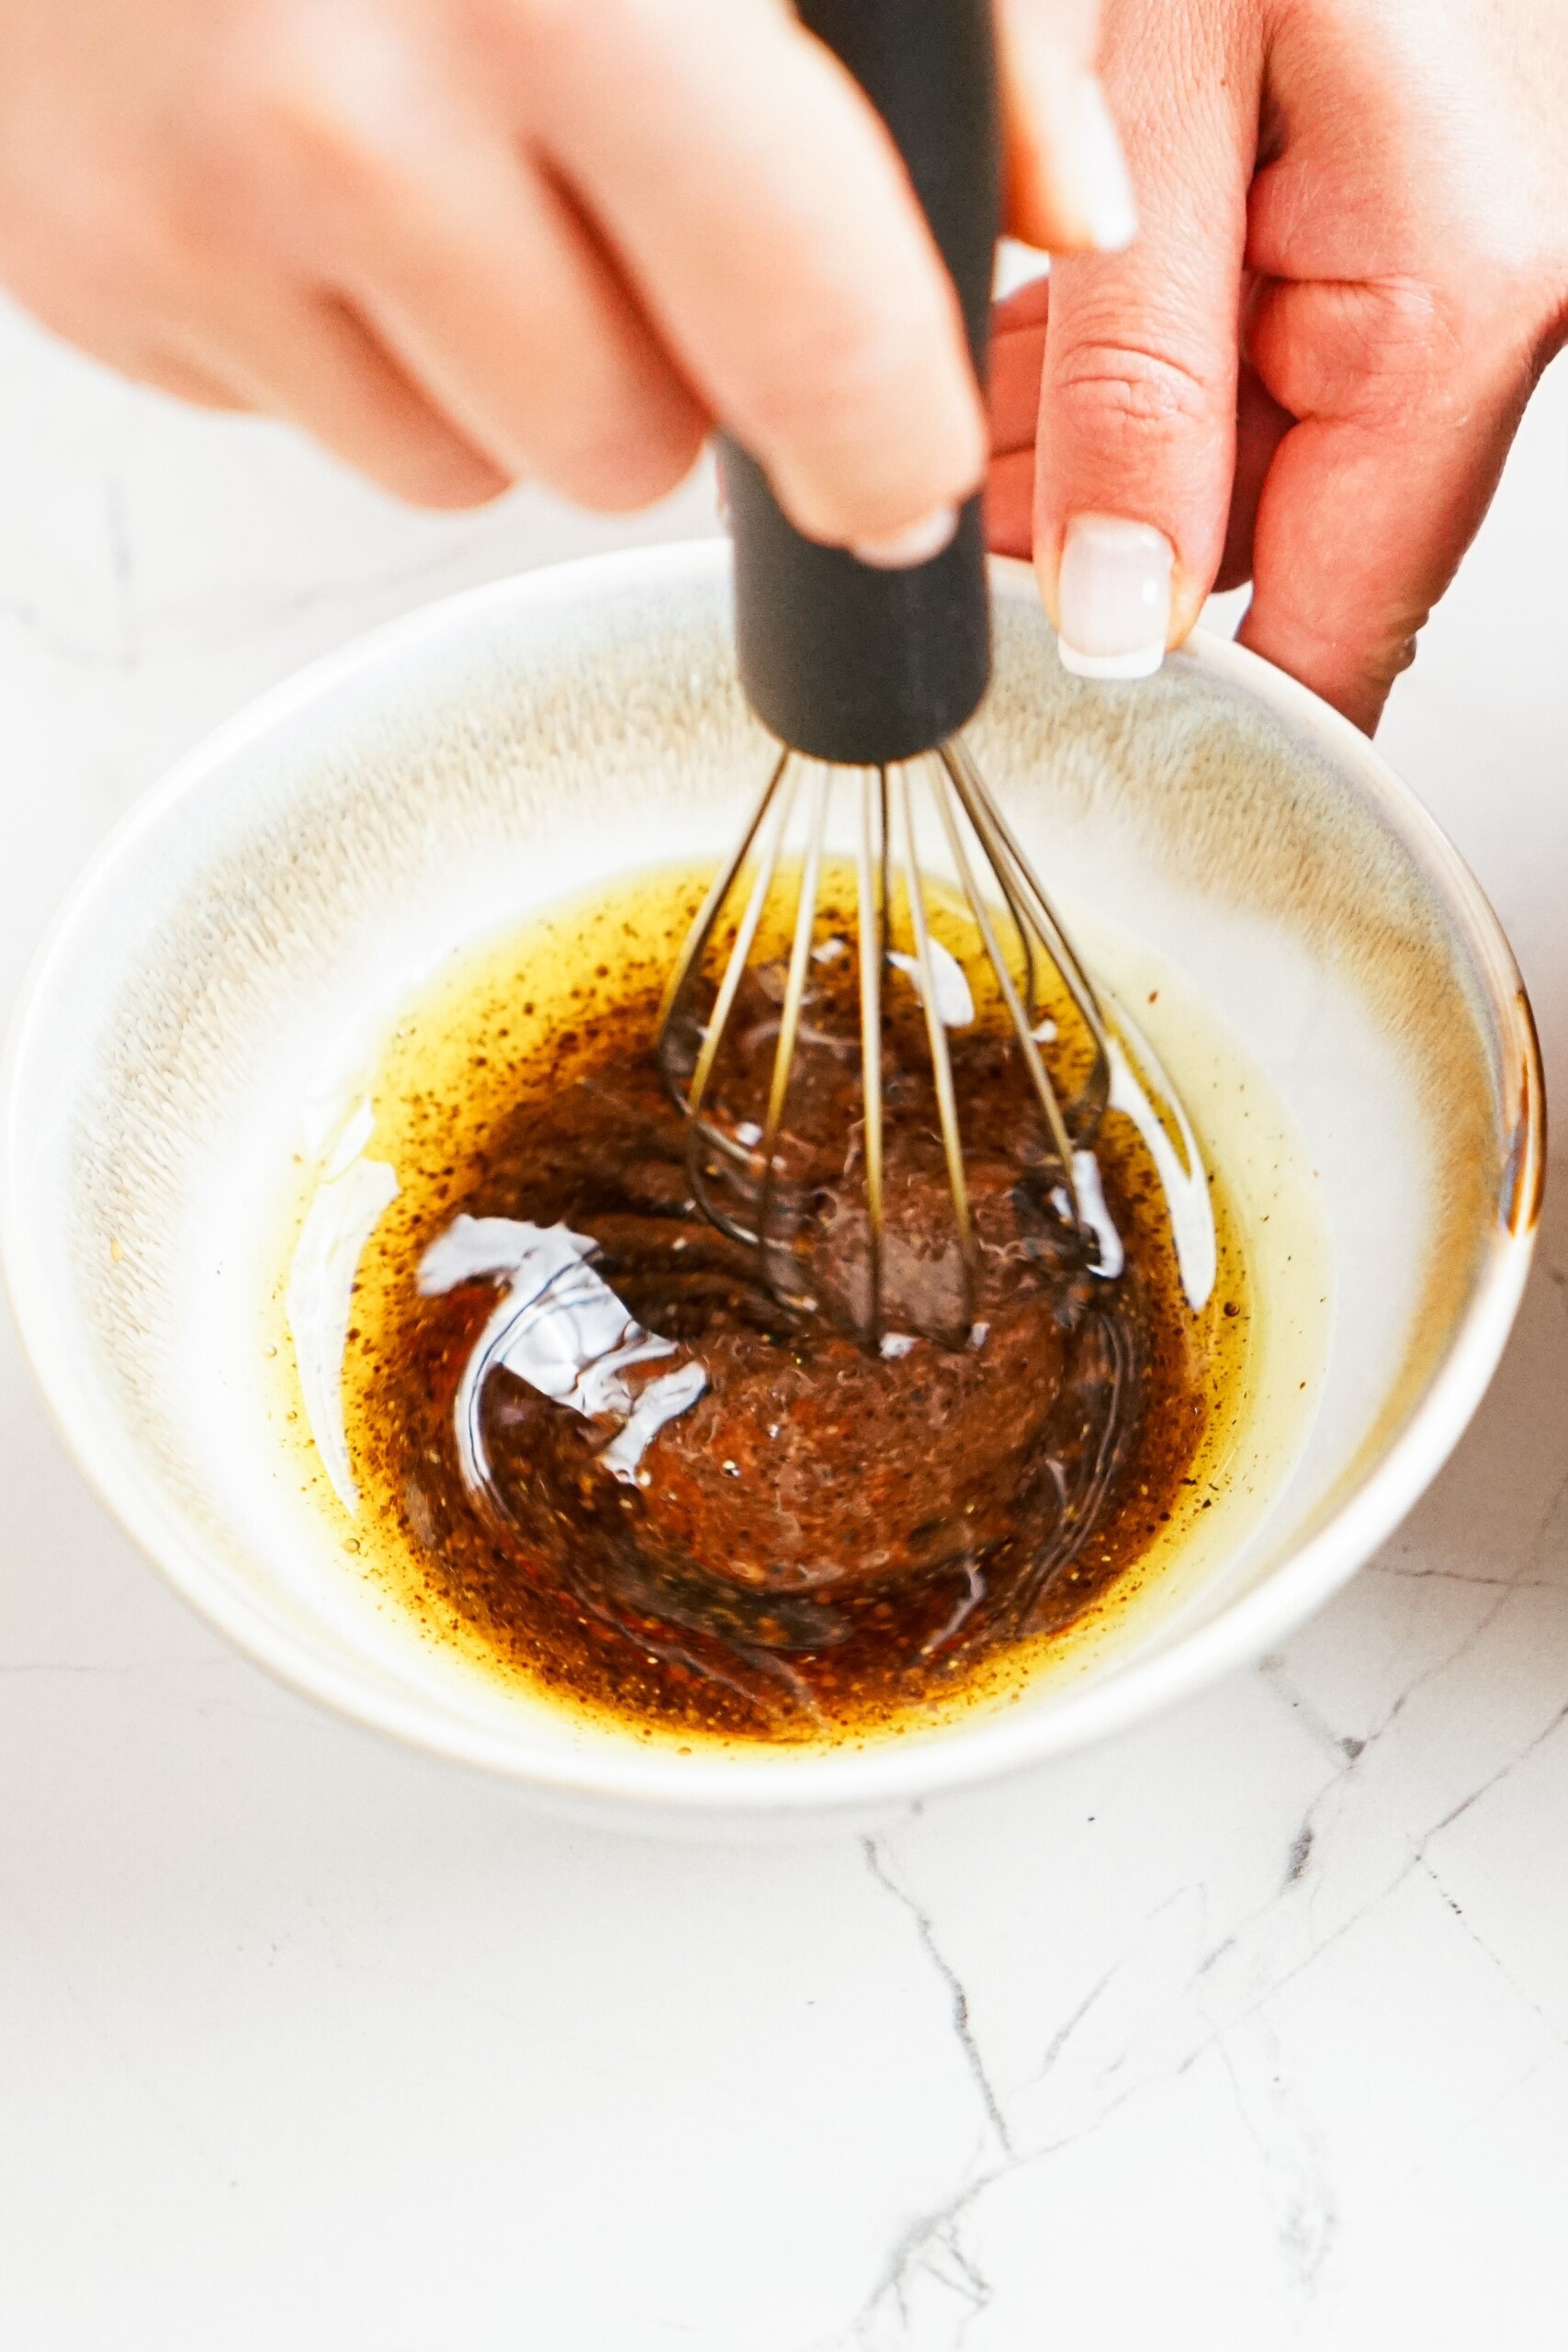 whisking balsamic dressing ingredients together in a bowl